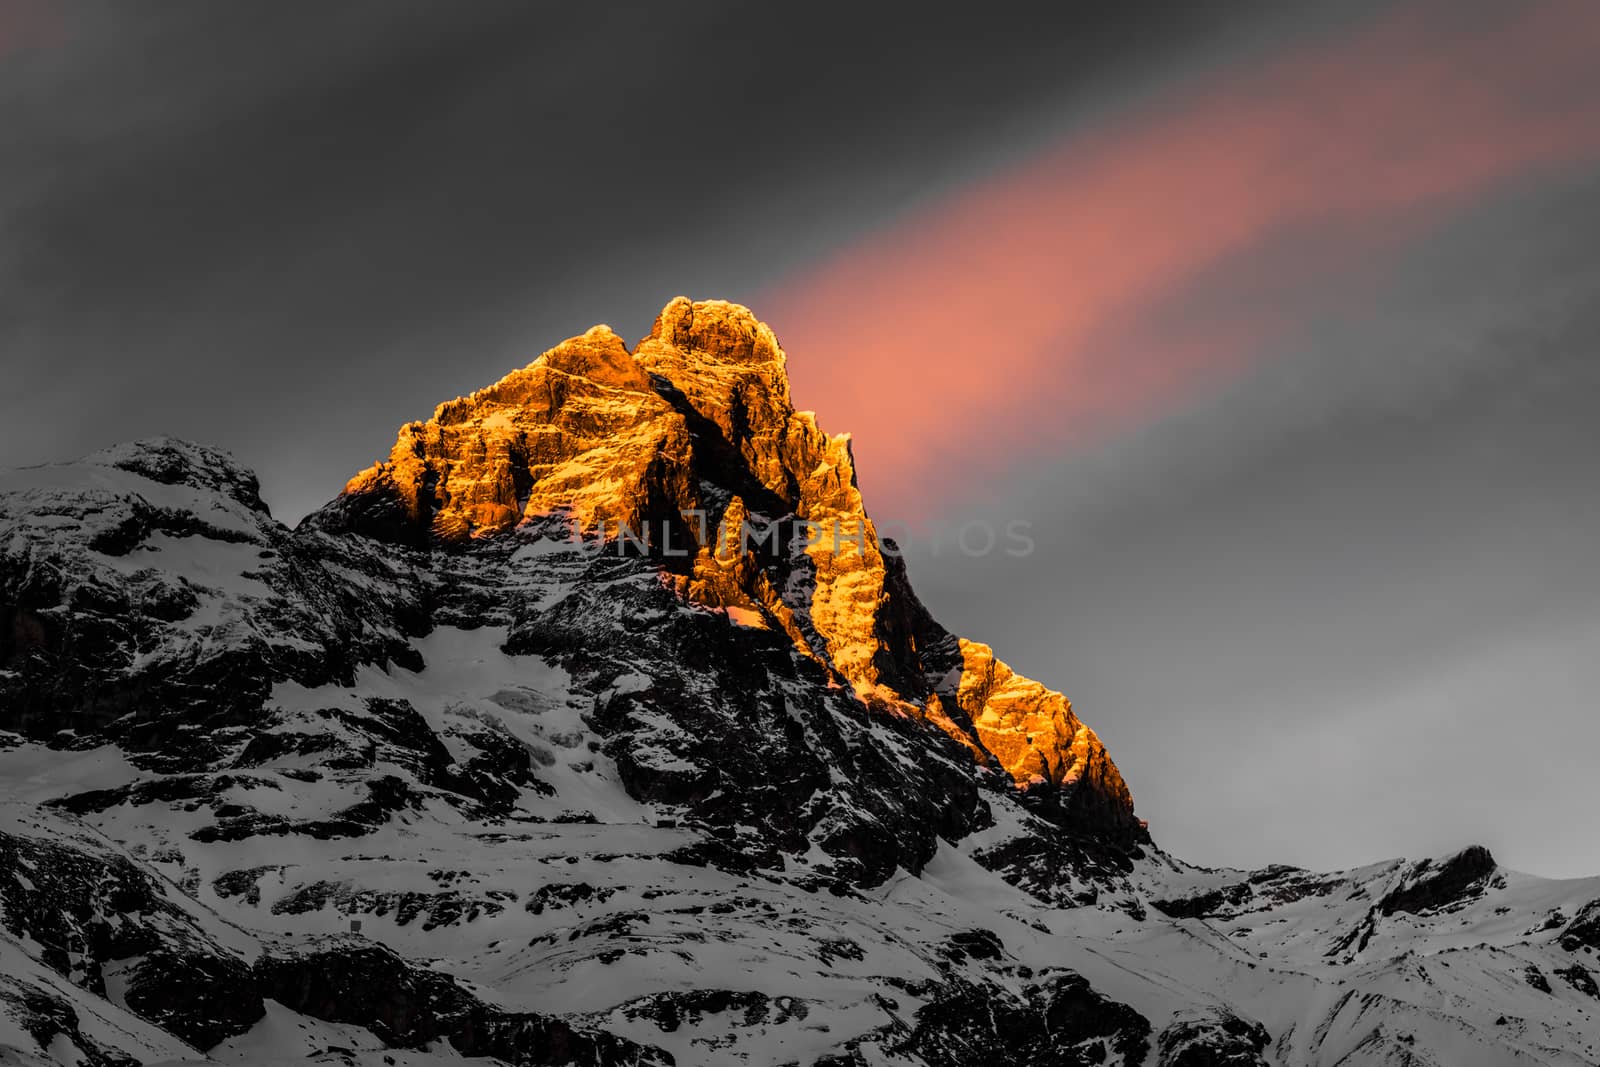 Sunset on the top of Matterhorn by Mdc1970